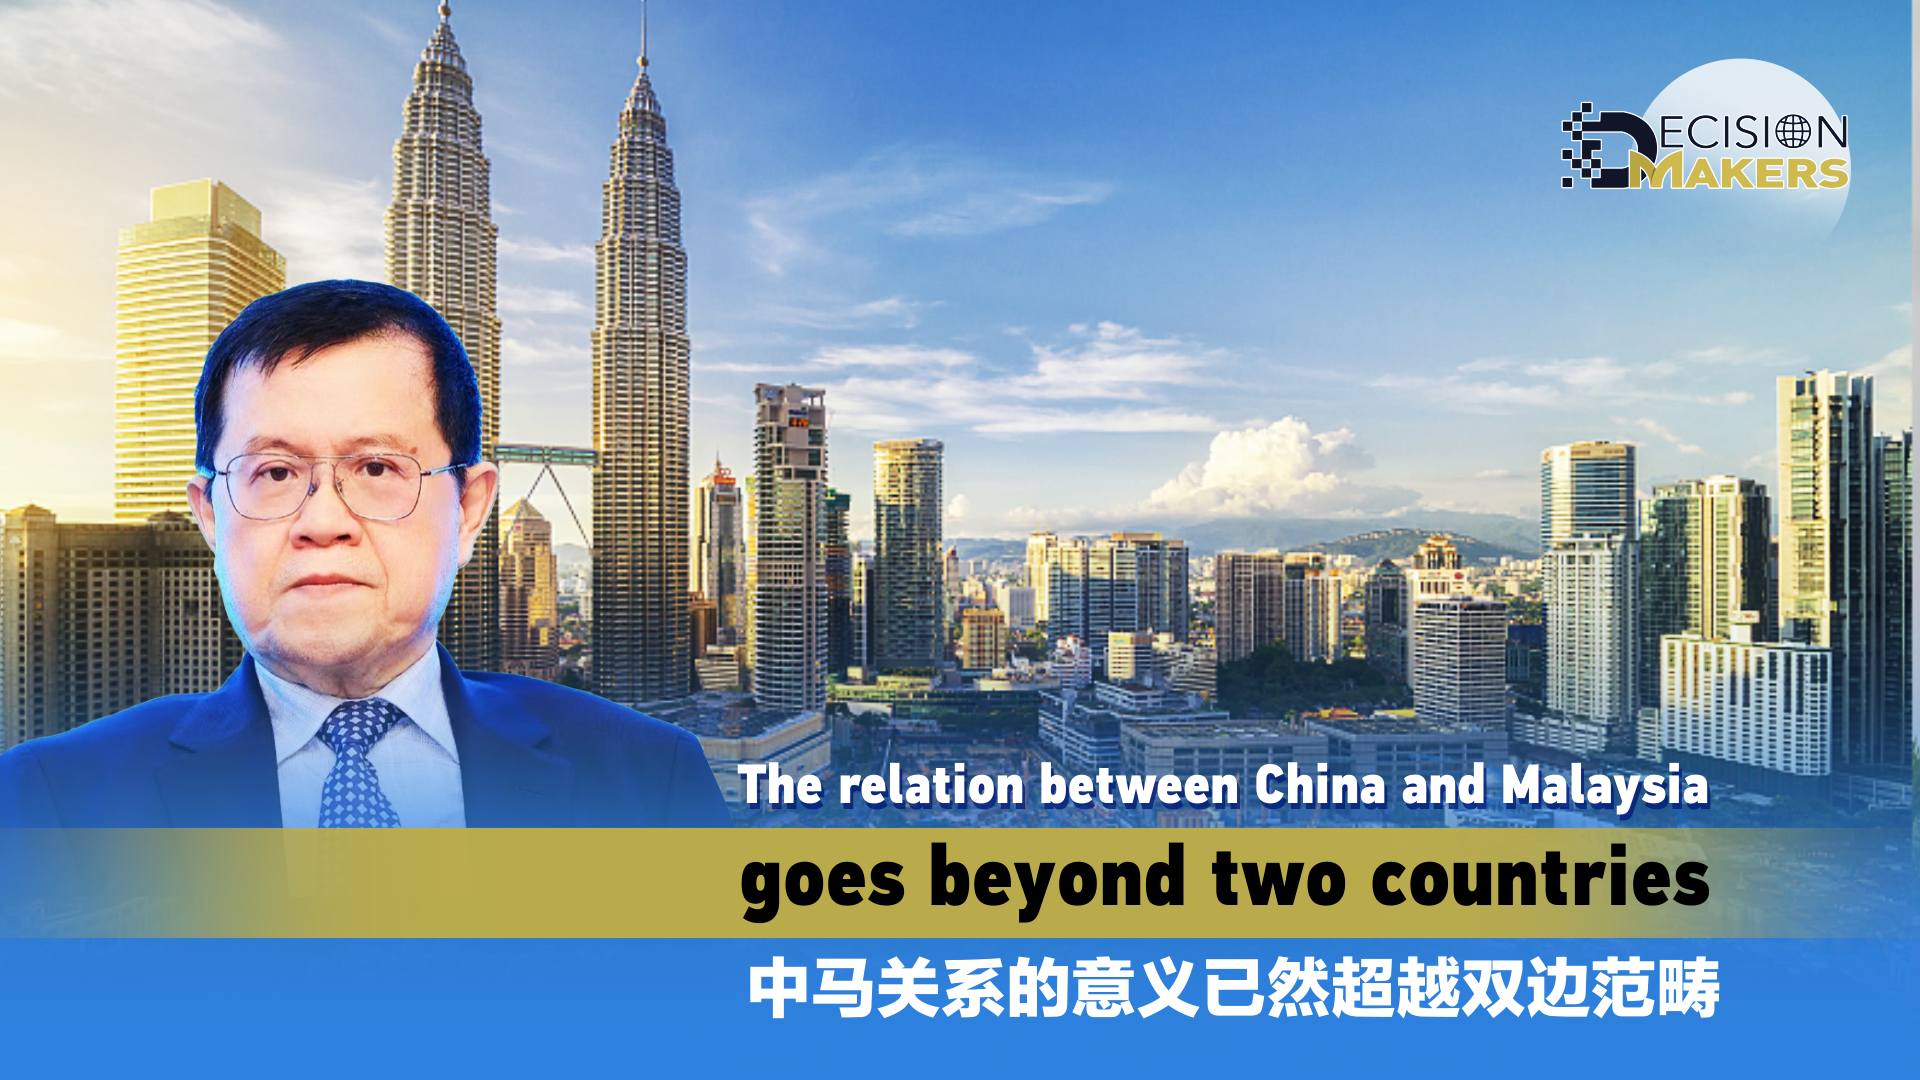 Relations between China and Malaysia go beyond the two countries